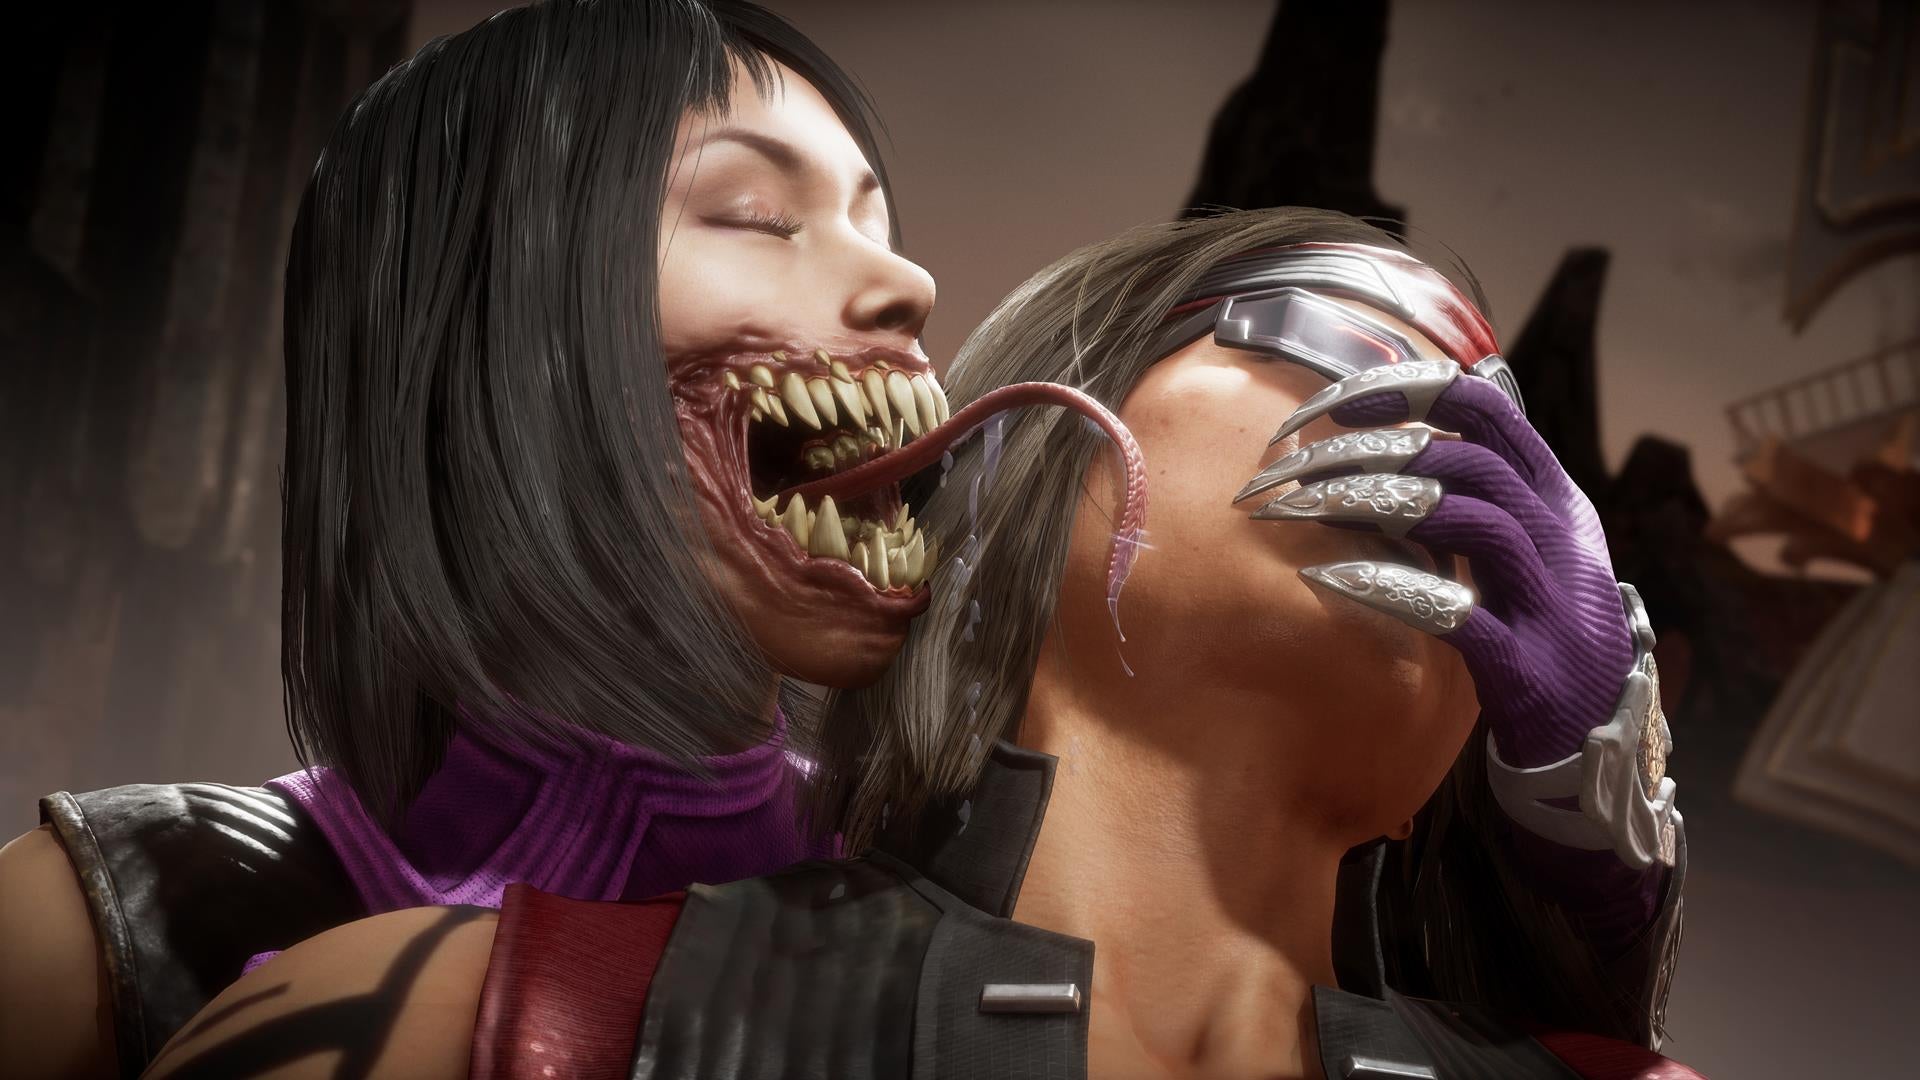 Image for Mortal Kombat 11 has sold over 12 million copies worldwide